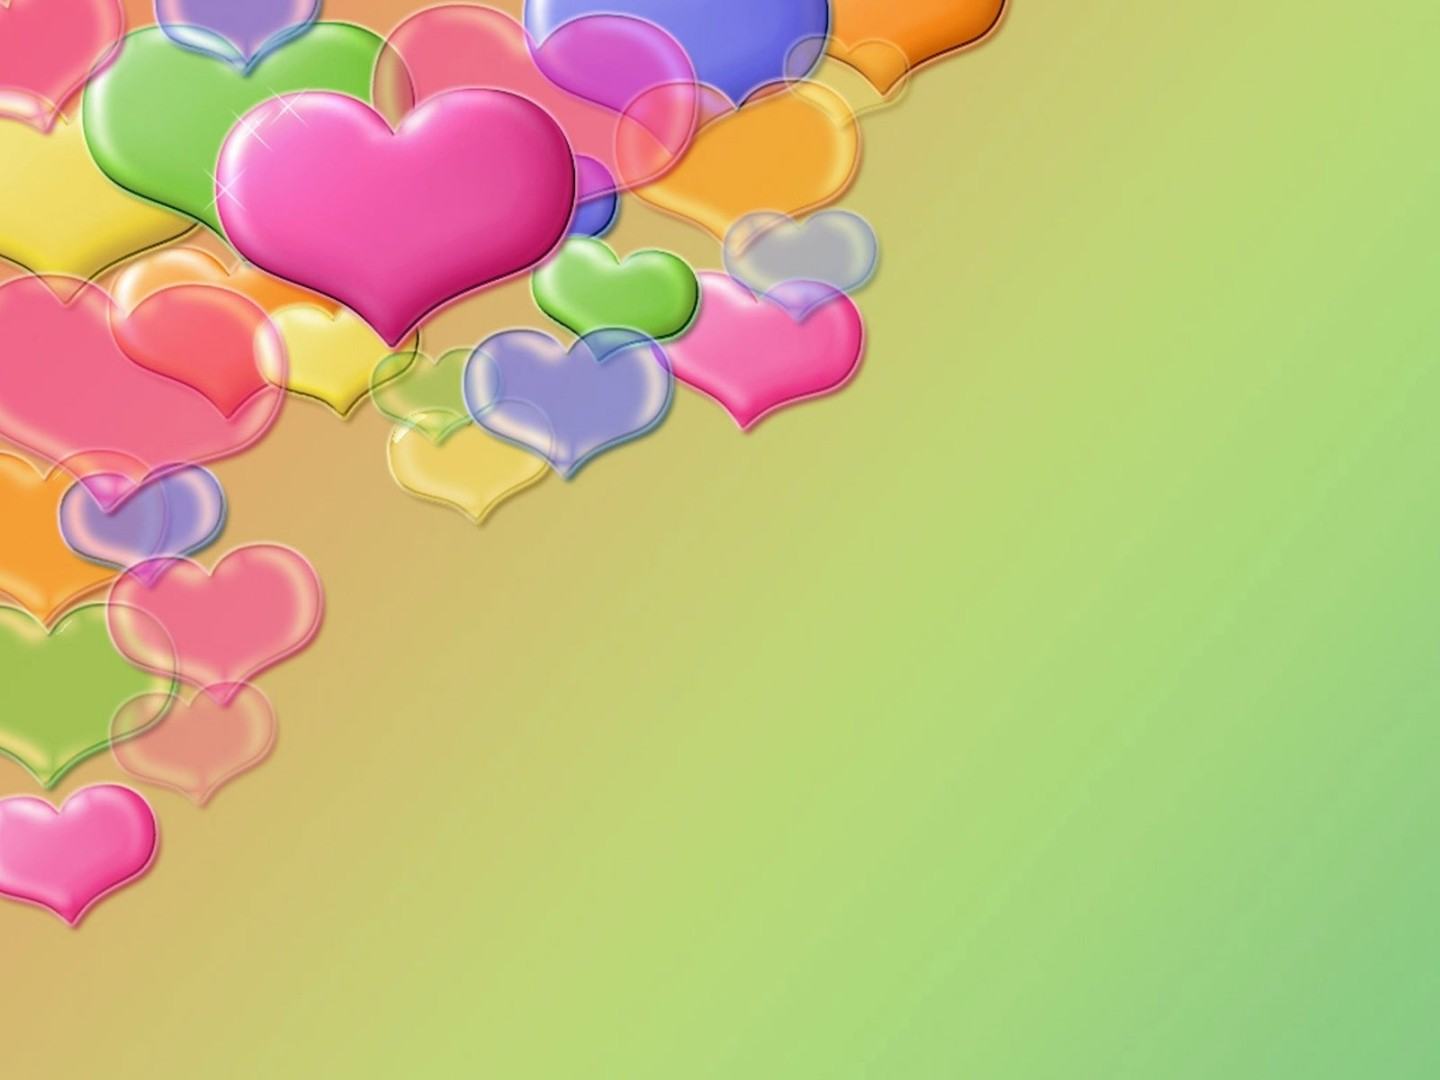 Valentines Day Wallpaper Which Is Under The